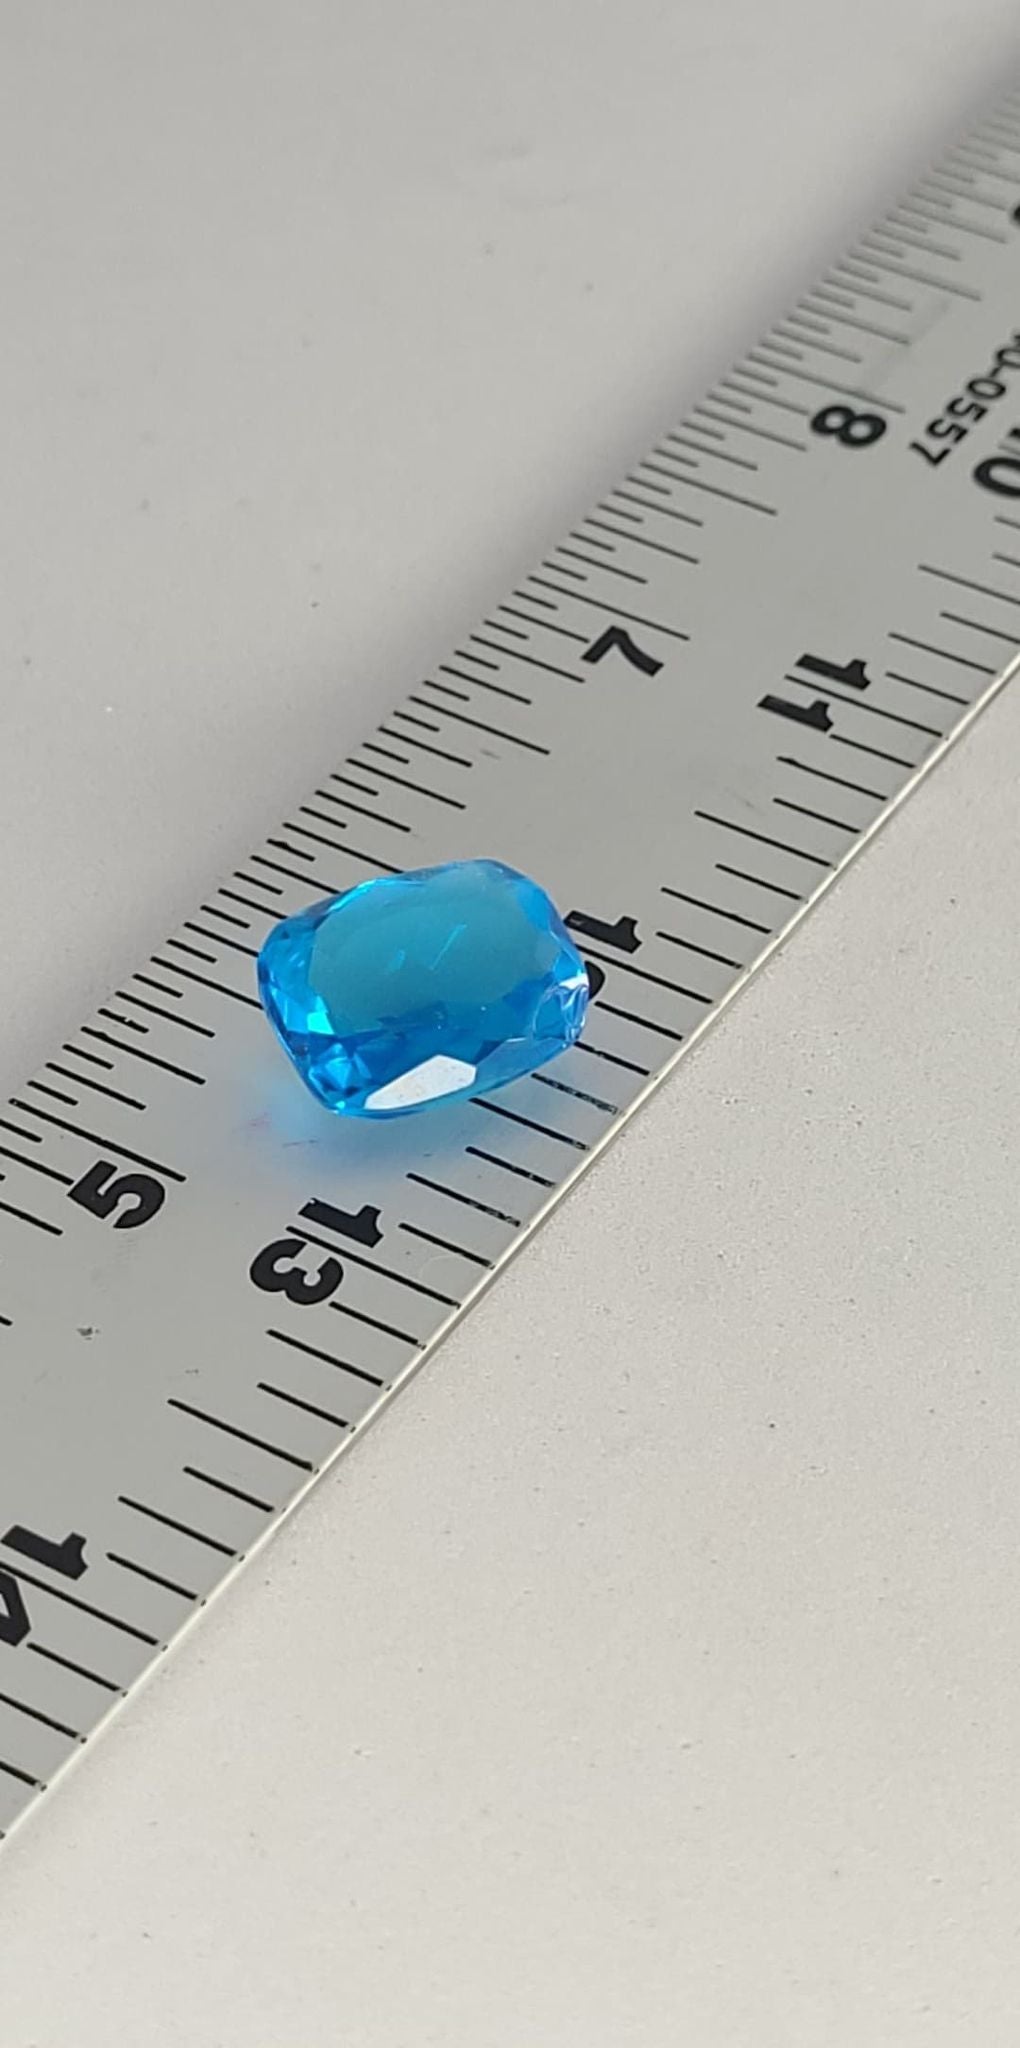 Faceted Gemstones, Blue Sapphire, Jewelry grade